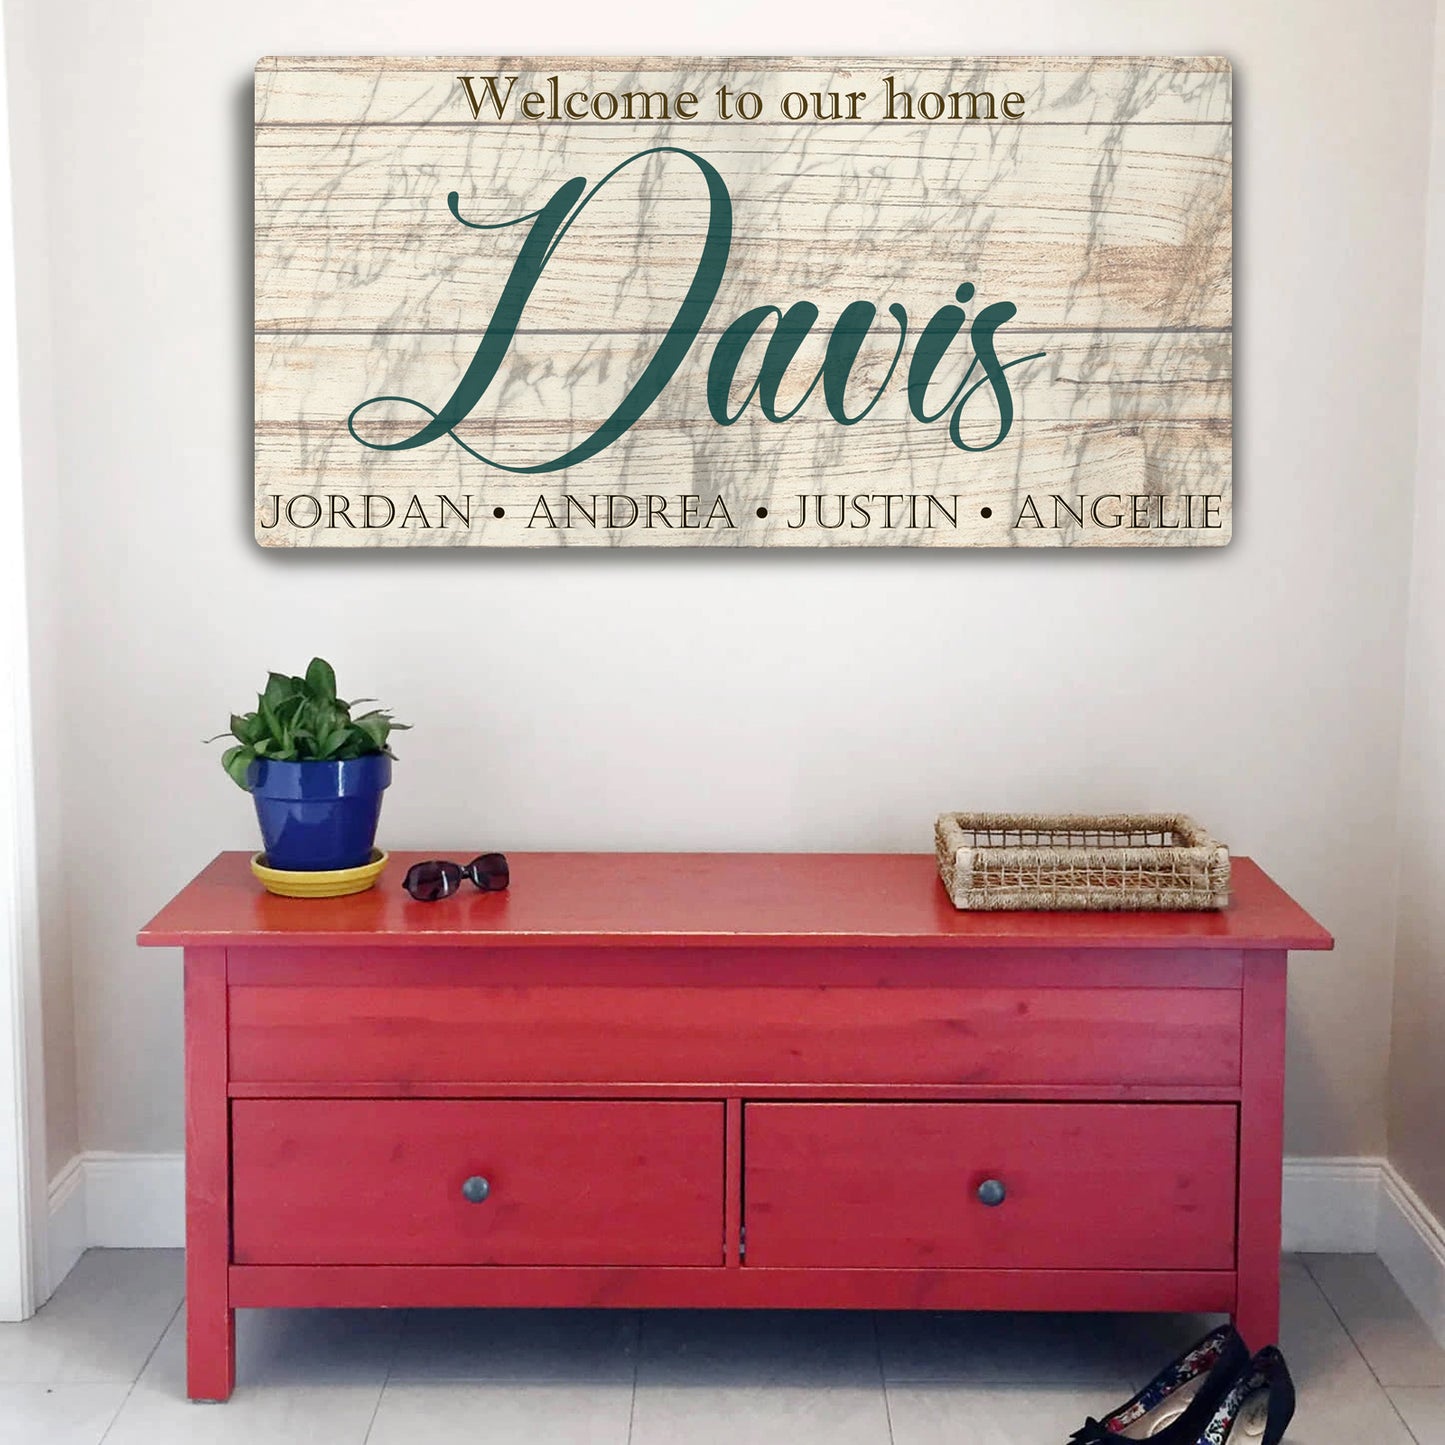 Welcome to Our Home Sign - Image by Tailored Canvases